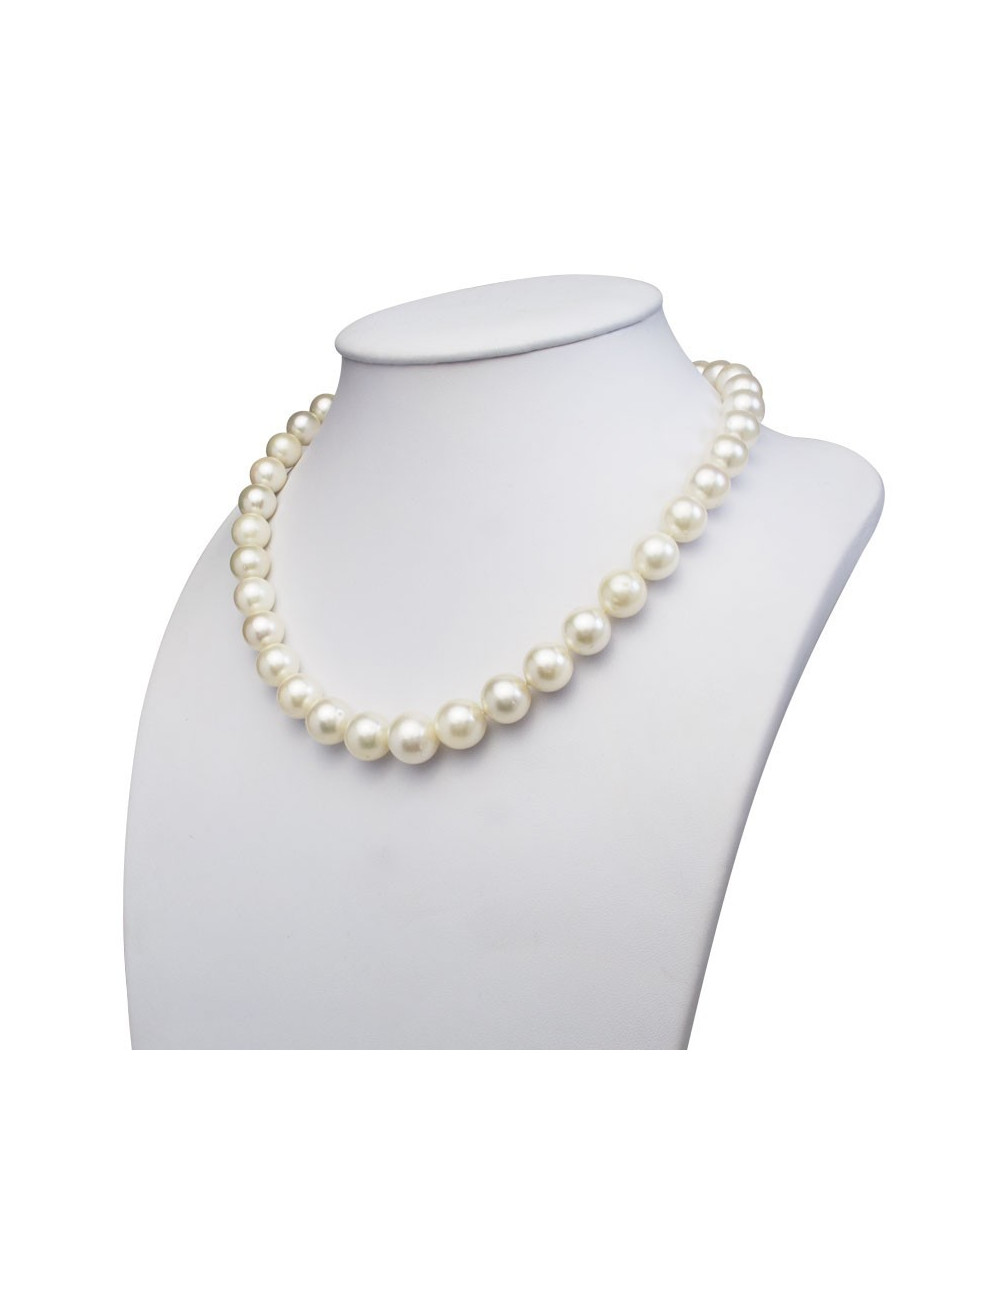 South Sea large pearl white pearl necklace with gold clasp N10125G8